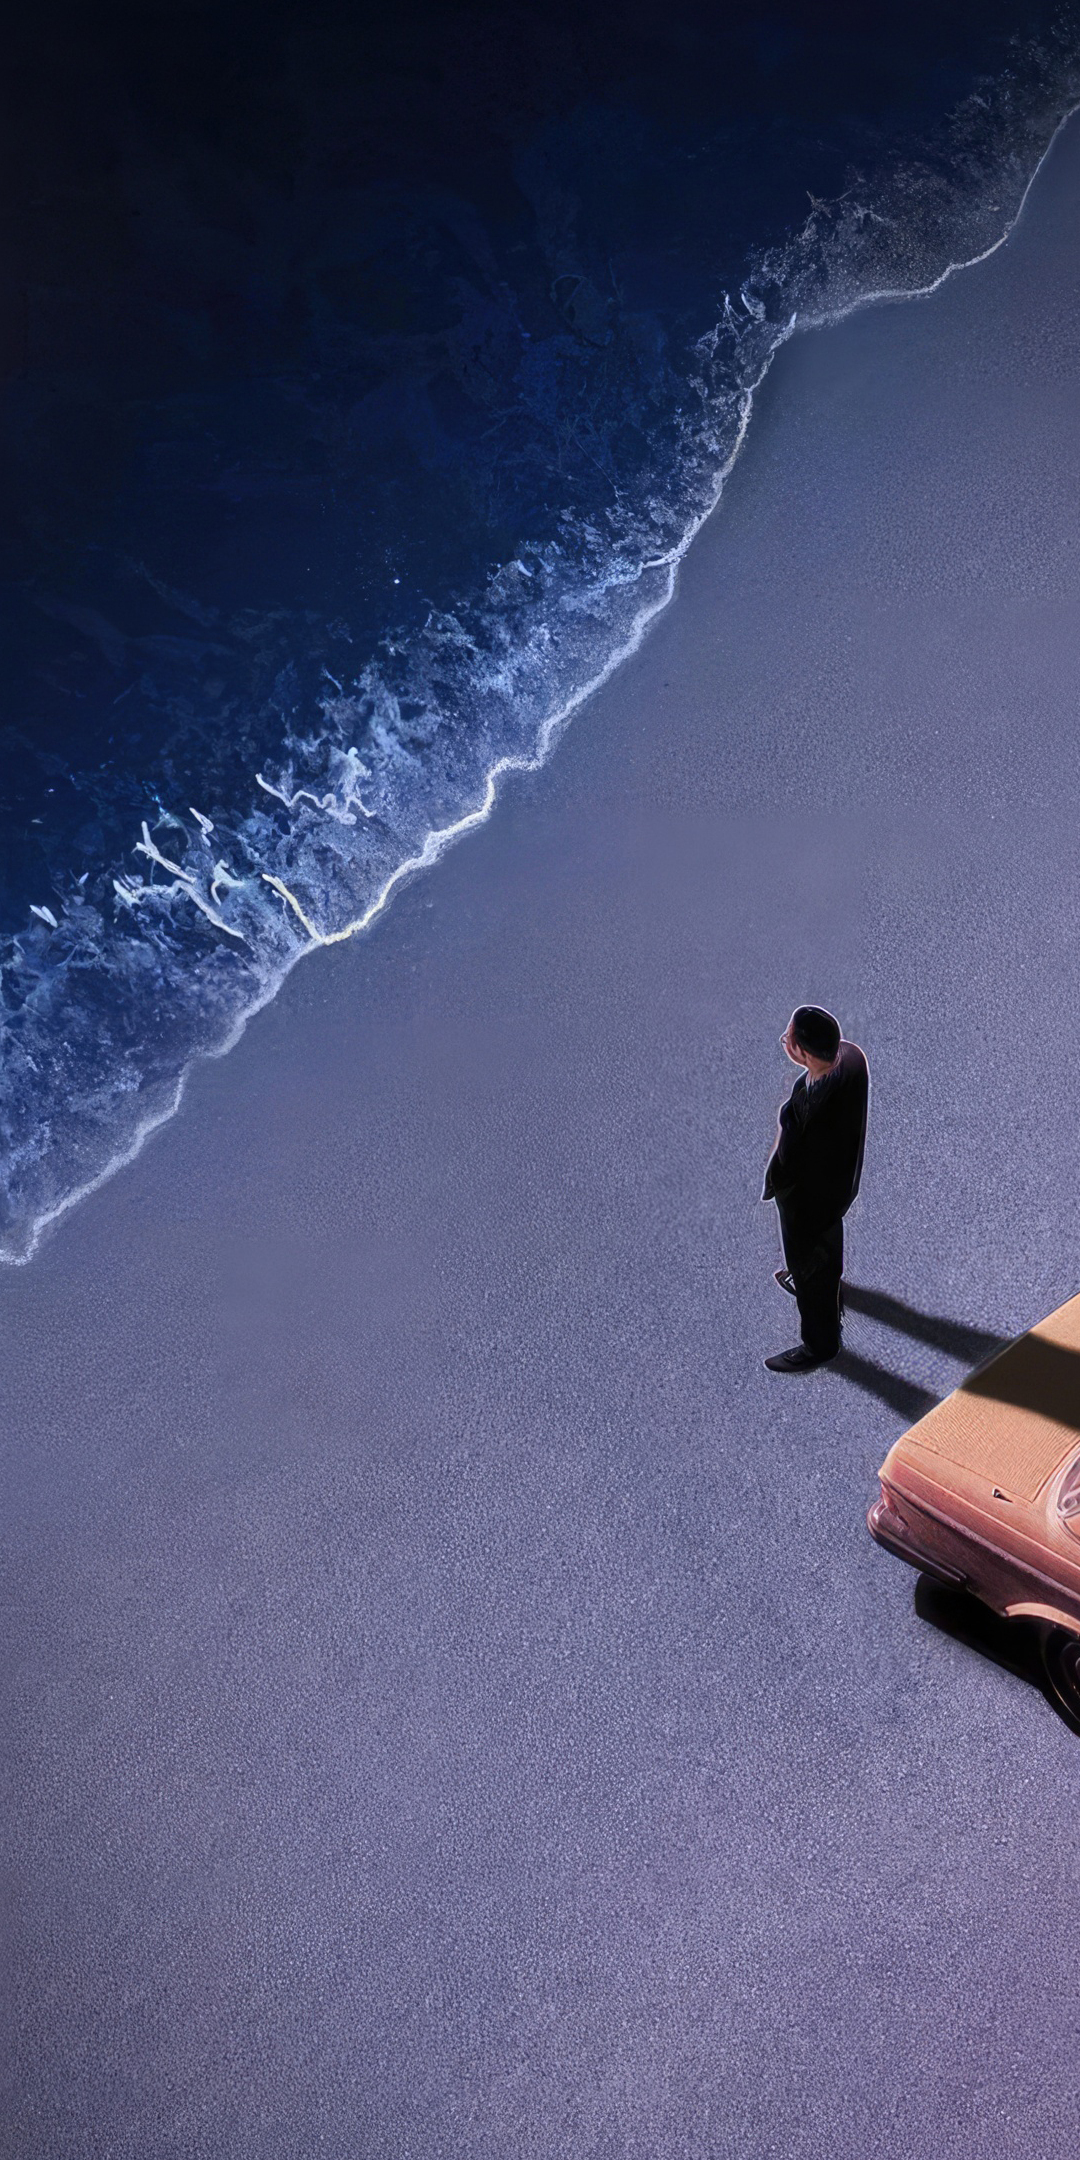 Lonely at night at the beach, car and man, art , 1080x2160 wallpaper